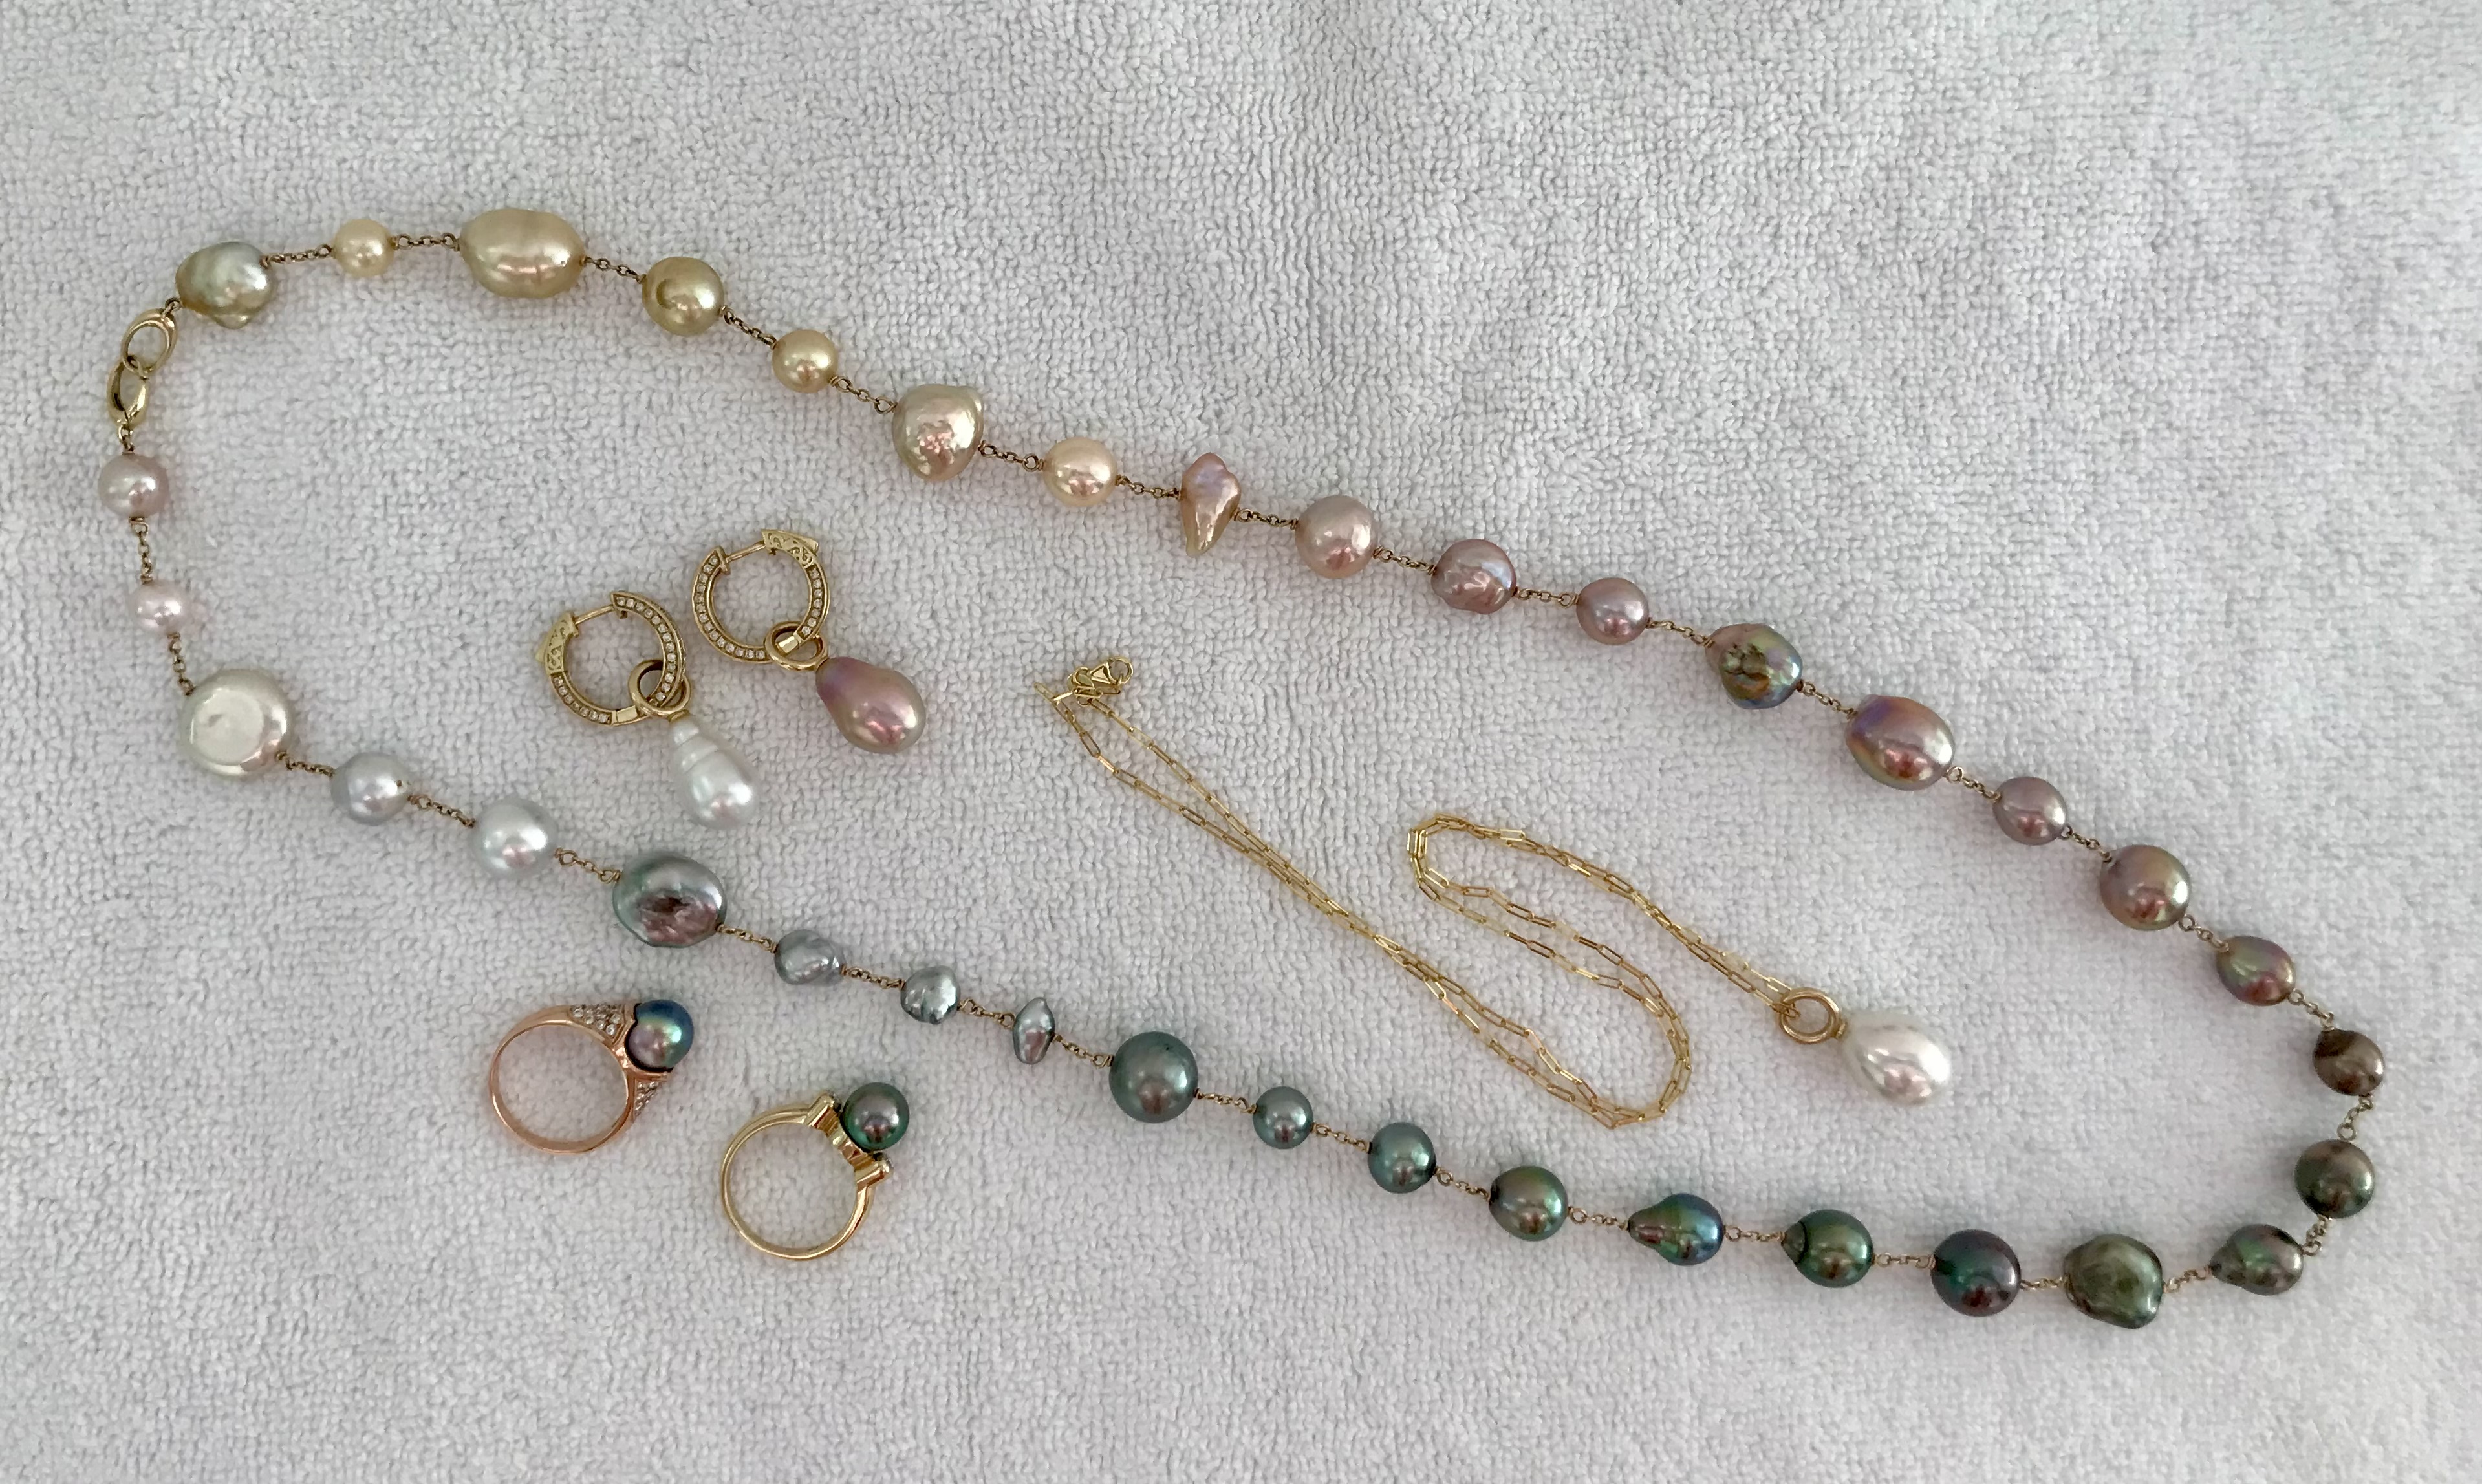 Ombre' tin-cup, The Queen pendant, Winter Snowman and Summer Rain pendants on earring hoops Sea of Cortez pearl from Douglas in the Pearl Paradise rose gold ring setting, and a Tahitian yellow gold ring from Kamoka